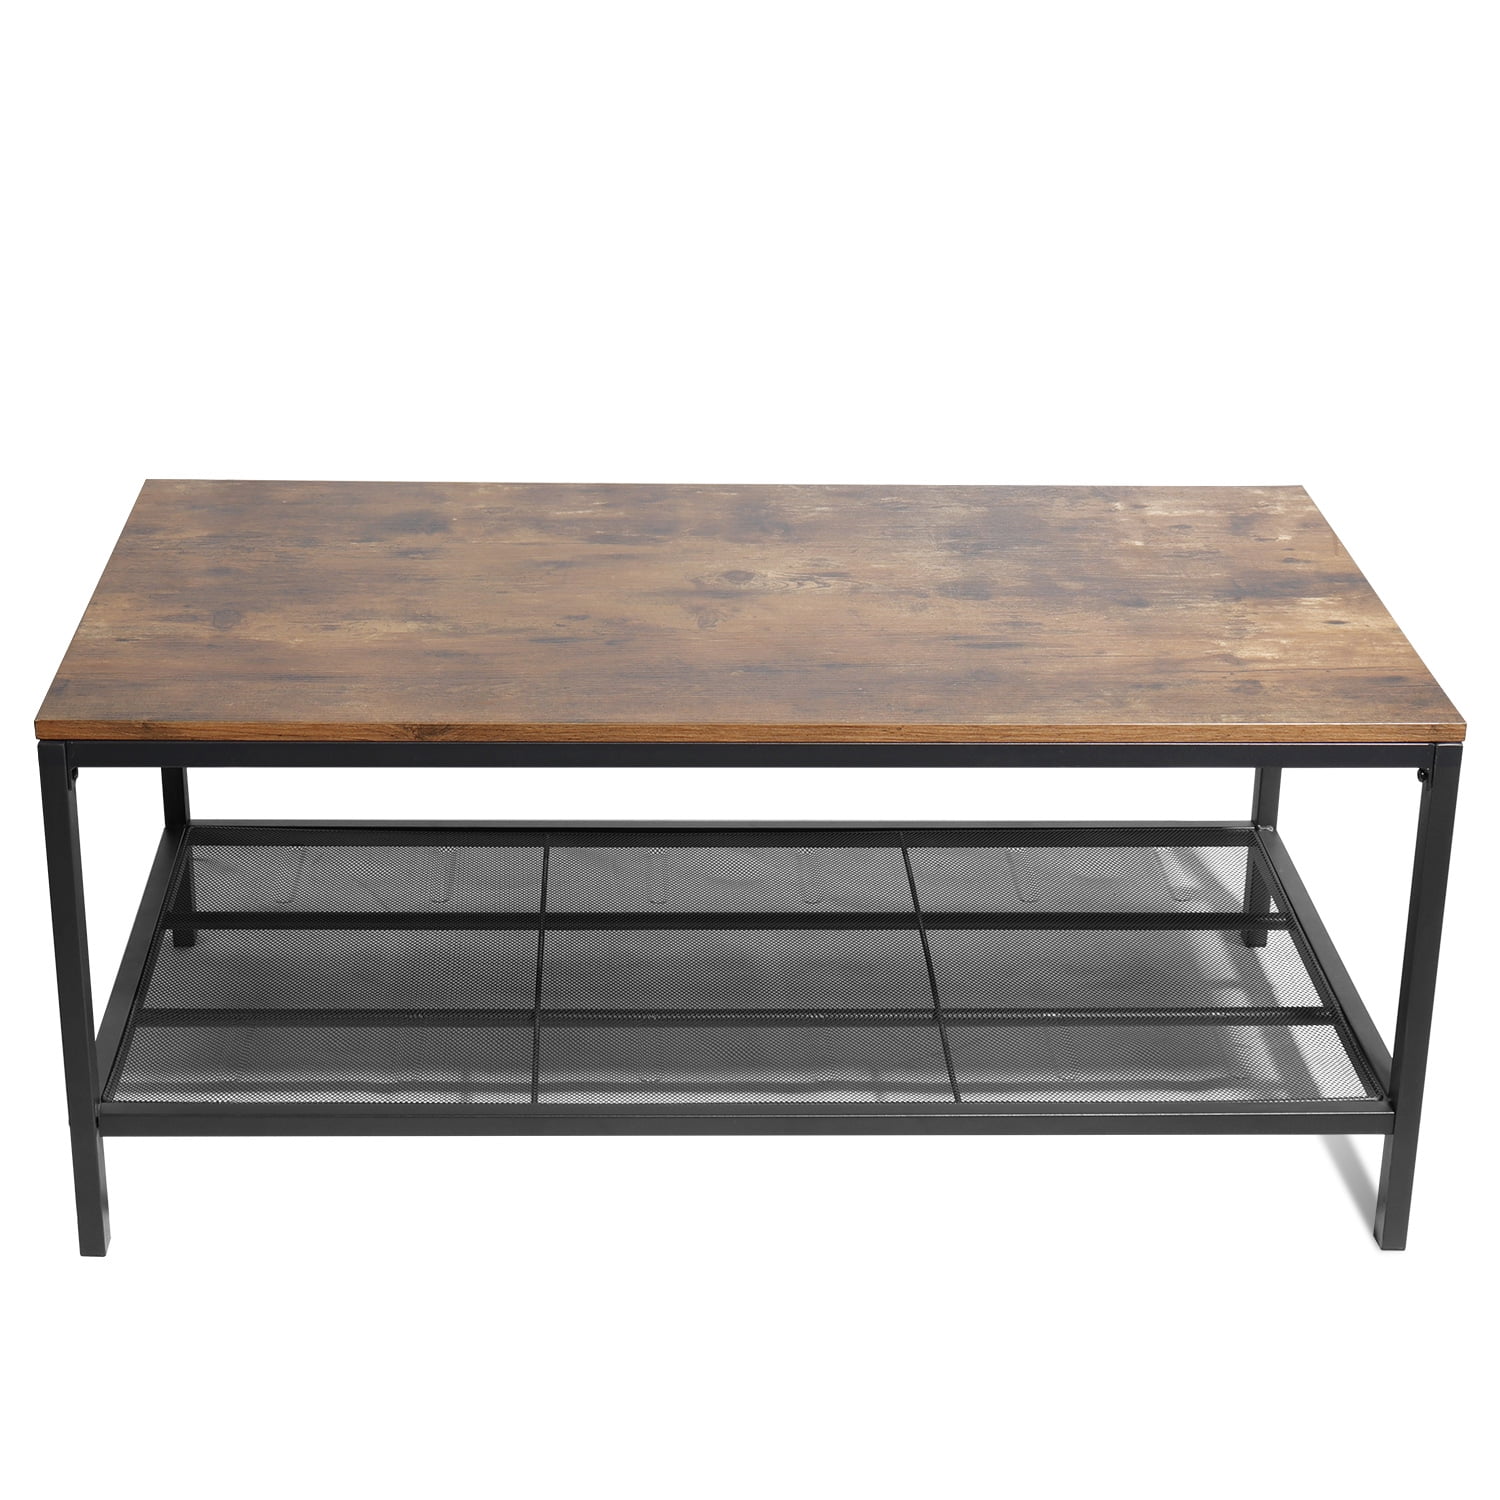 Wooden Coffee Table With Mesh Shelf, Rustic Wooden Coffee Table With Storage